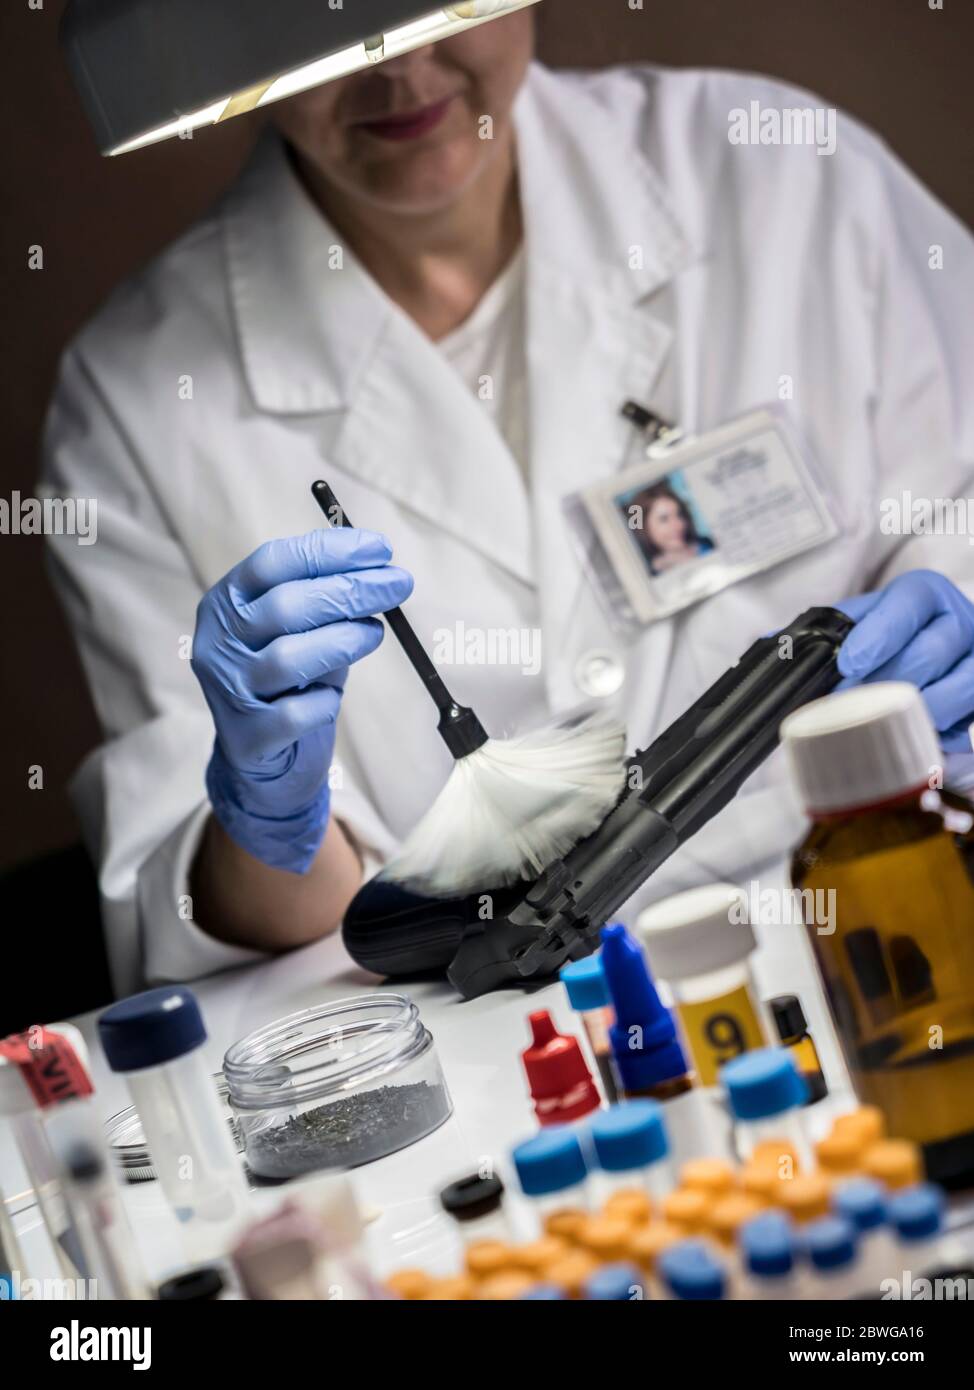 Scientific police officer analyzes gun to find traces, conceptual image Stock Photo